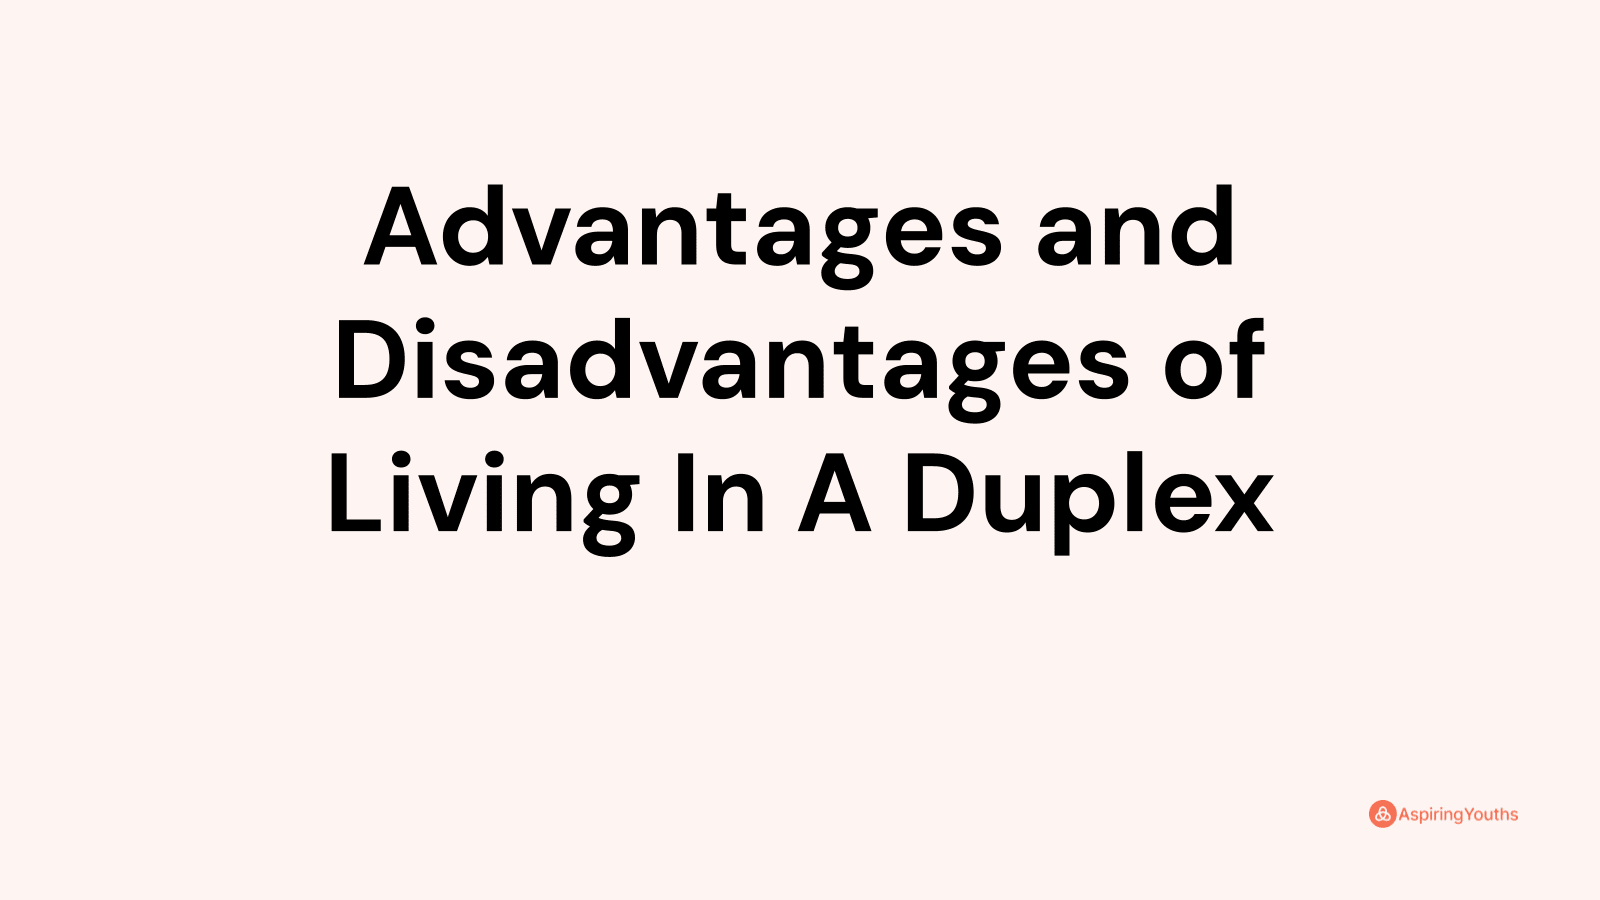 Advantages and disadvantages of Living In A Duplex